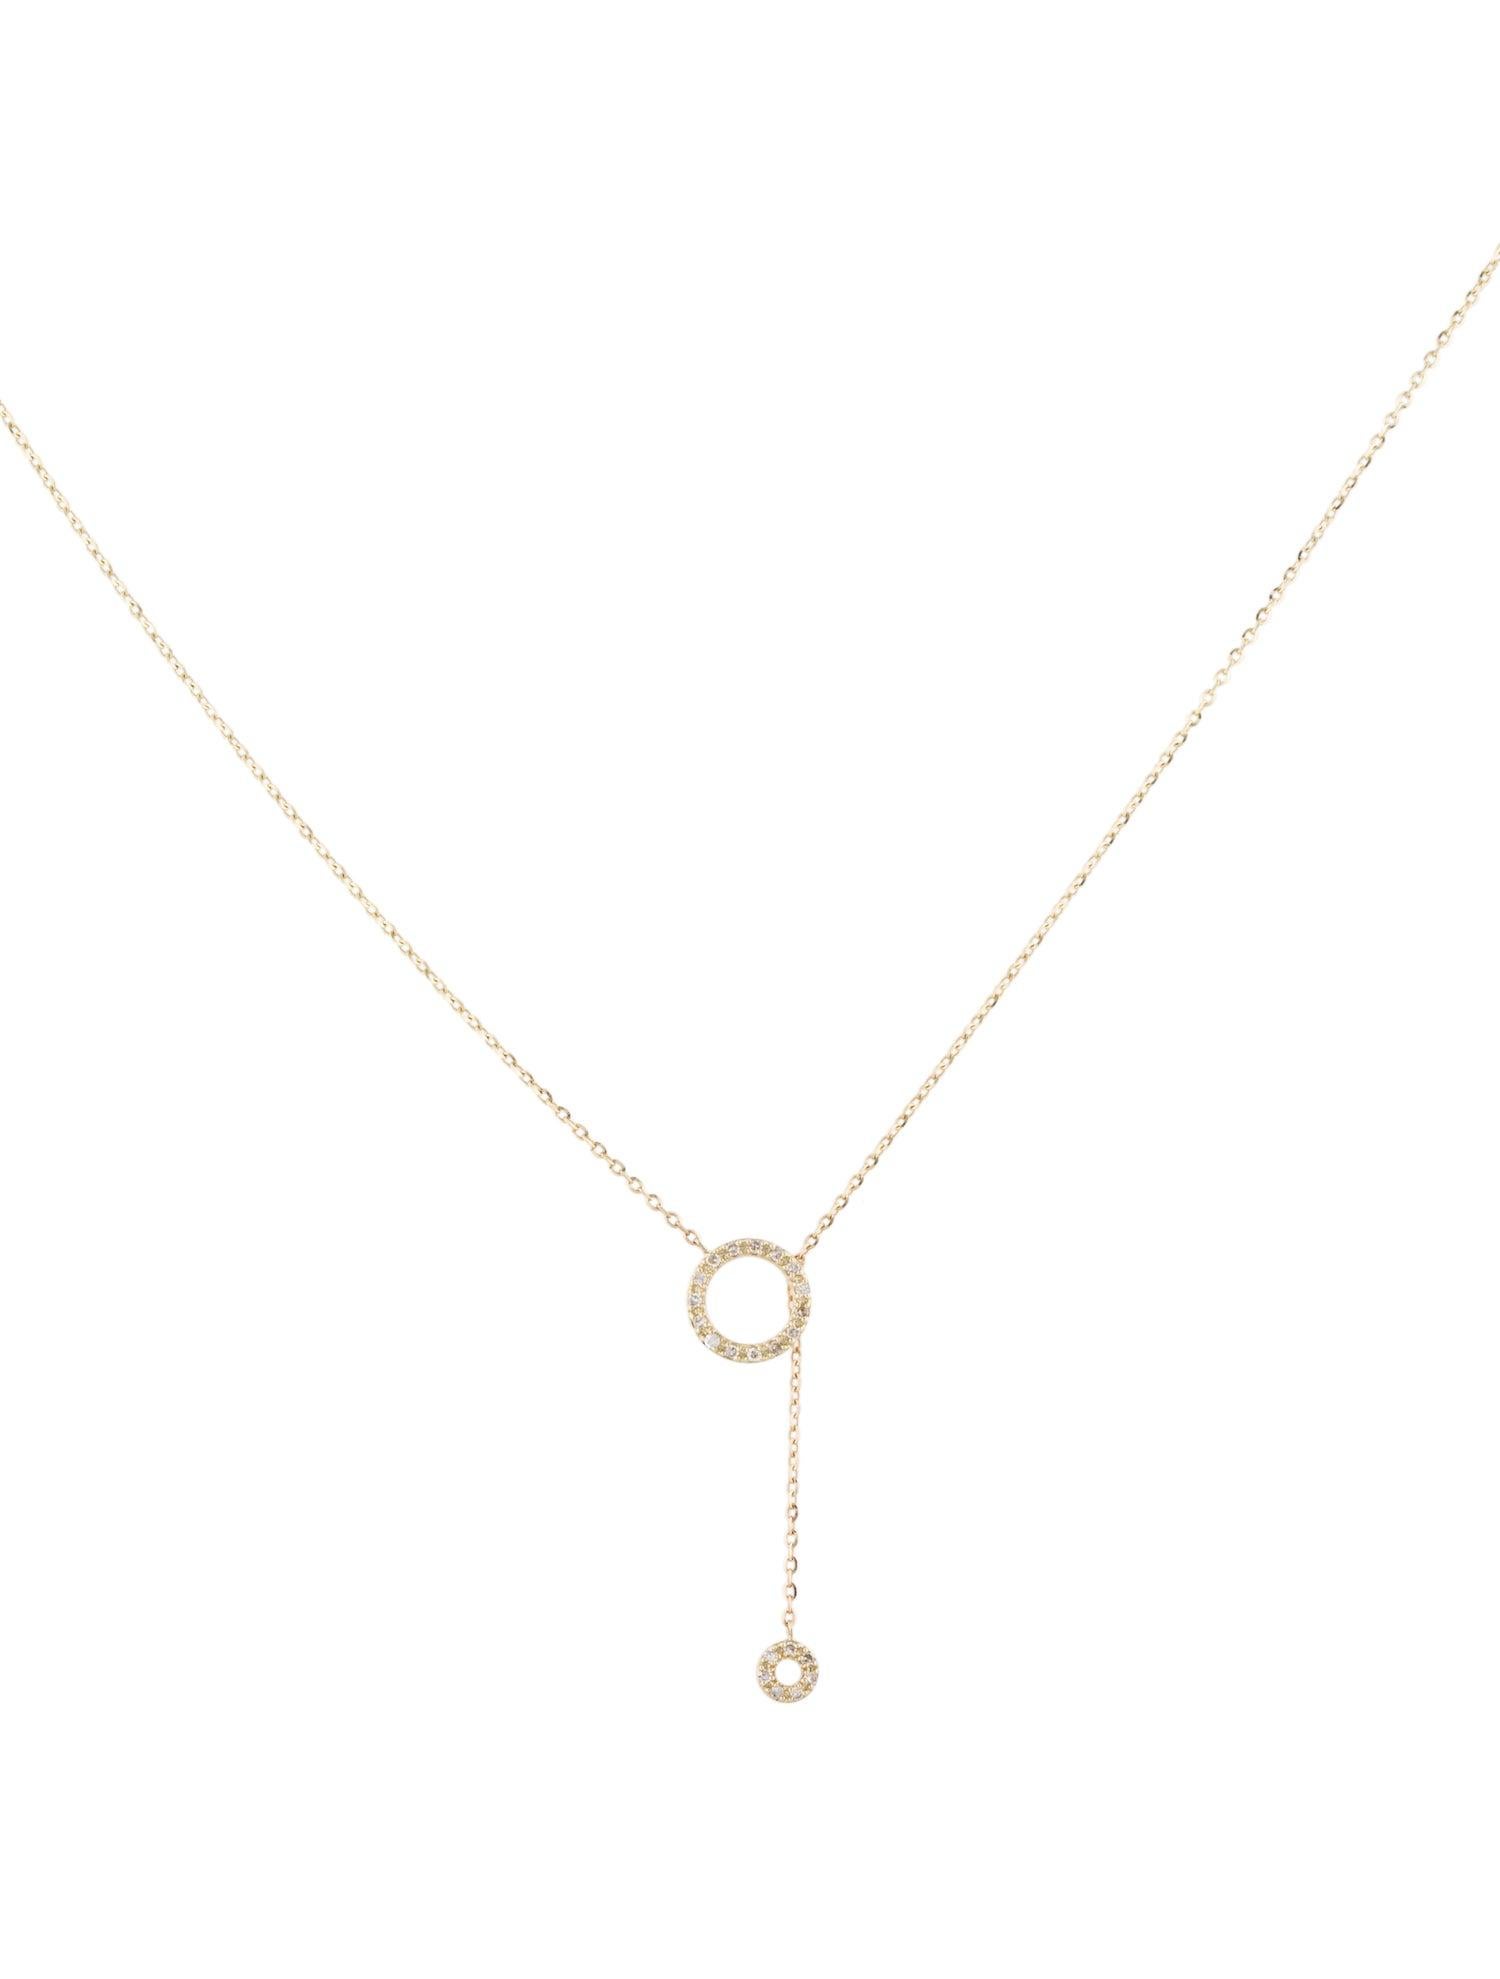 Contemporary 14K Yellow Gold 0.10ct Diamond Dangle Necklace for Her For Sale